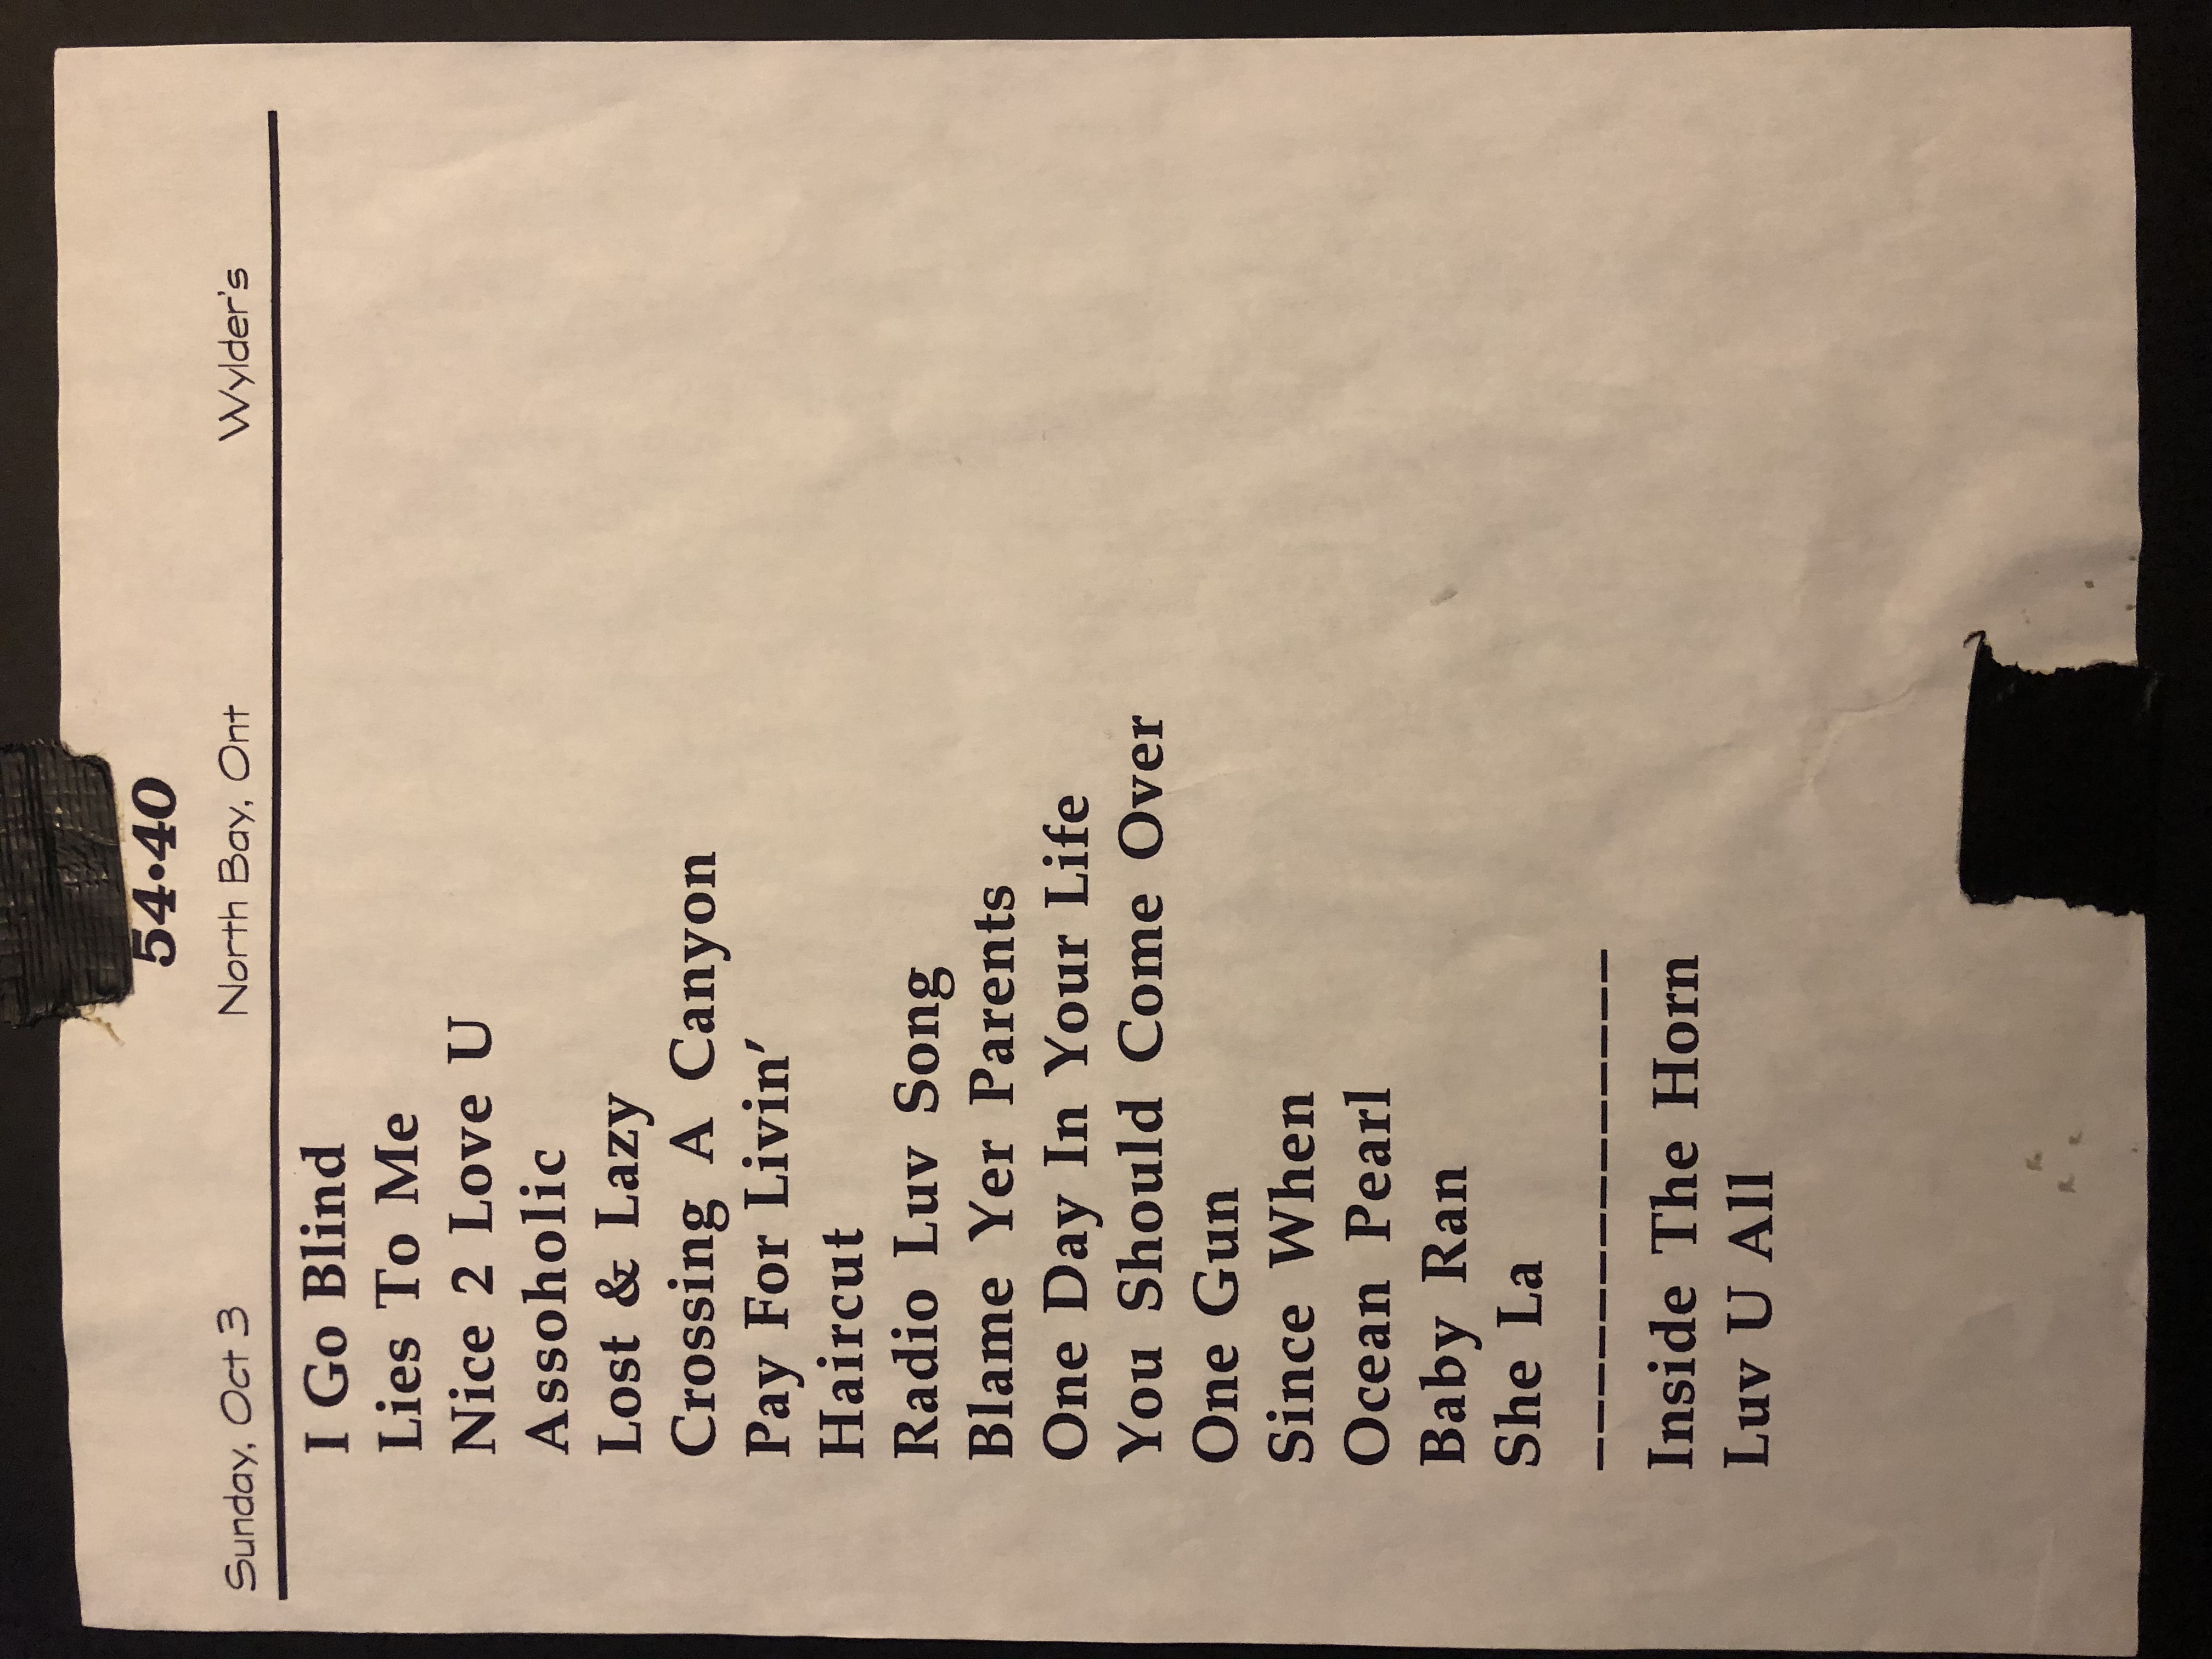 54 40 02 Bala Show Used Set List Collectionzz